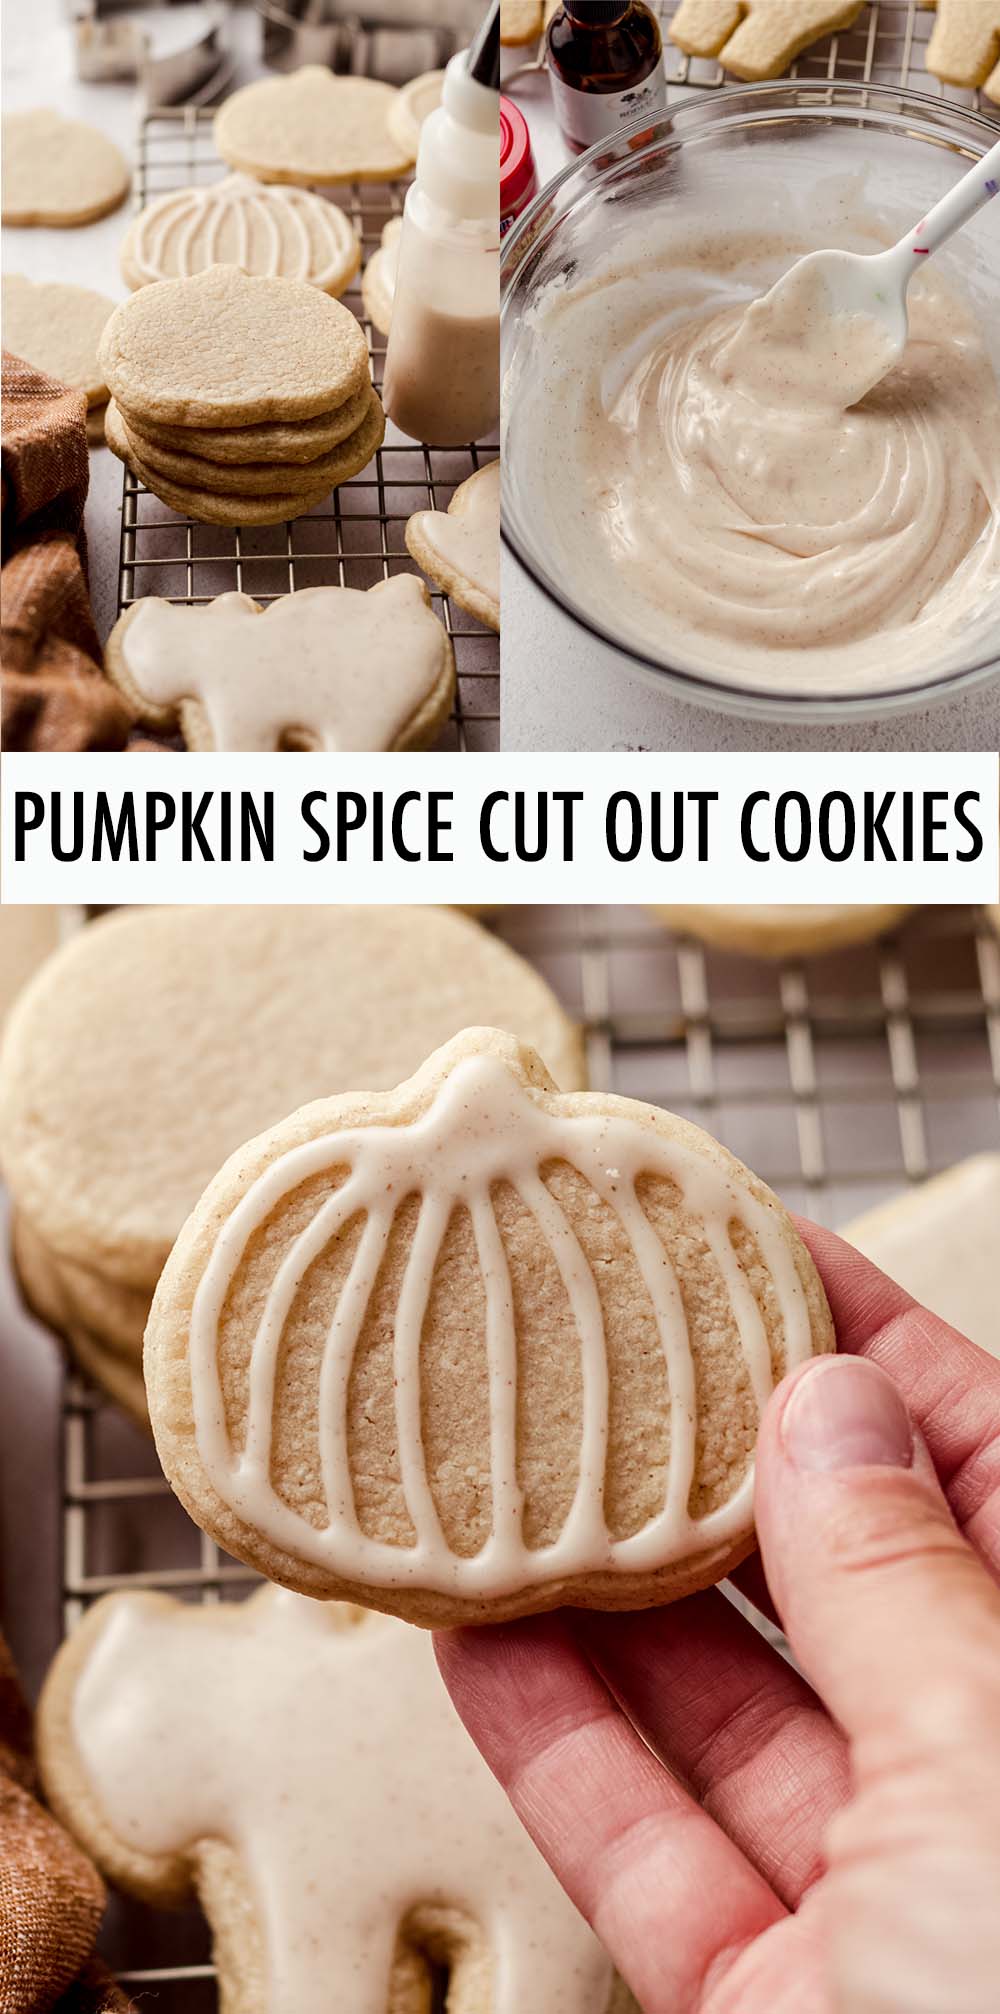 No dough chilling necessary for these pumpkin spiced, soft cut-out sugar cookies that are perfect for decorating with icing and sprinkles. Crisp edges, soft centers, and customizable in shape. Use my easy pumpkin spice royal icing recipe (included) to decorate them! via @frshaprilflours